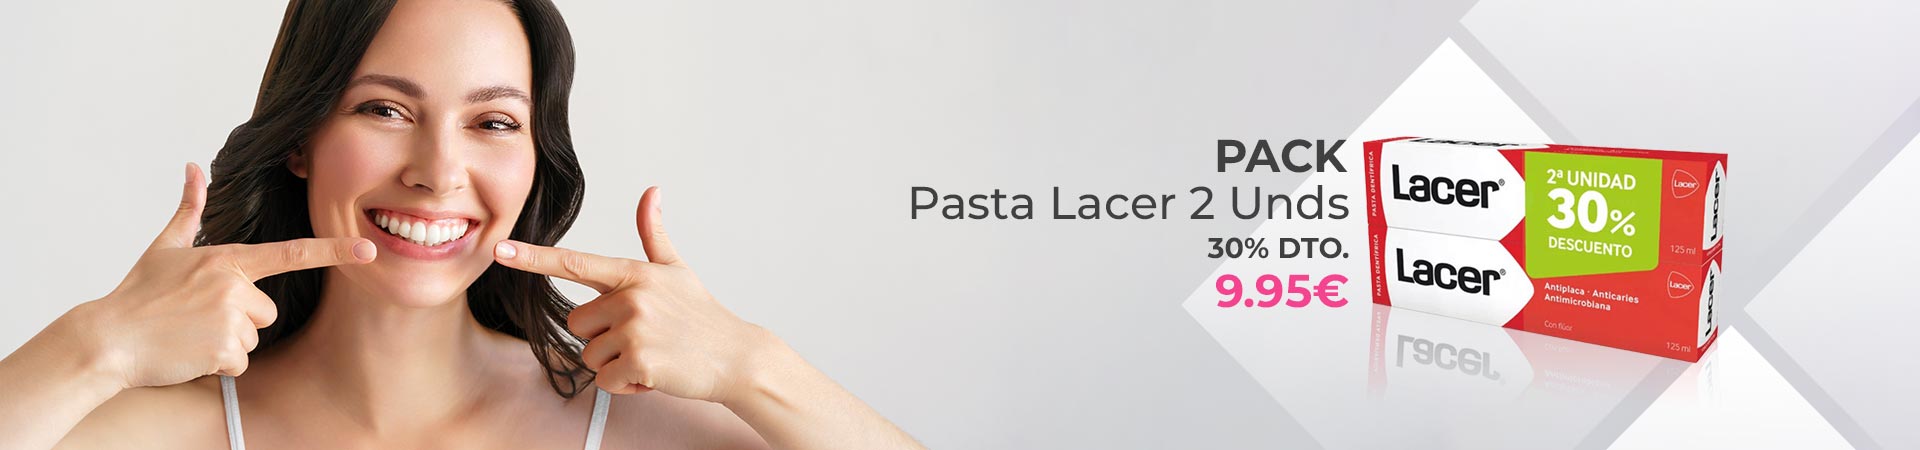 Pack Pasta Lacer 2 unds 30% dto.